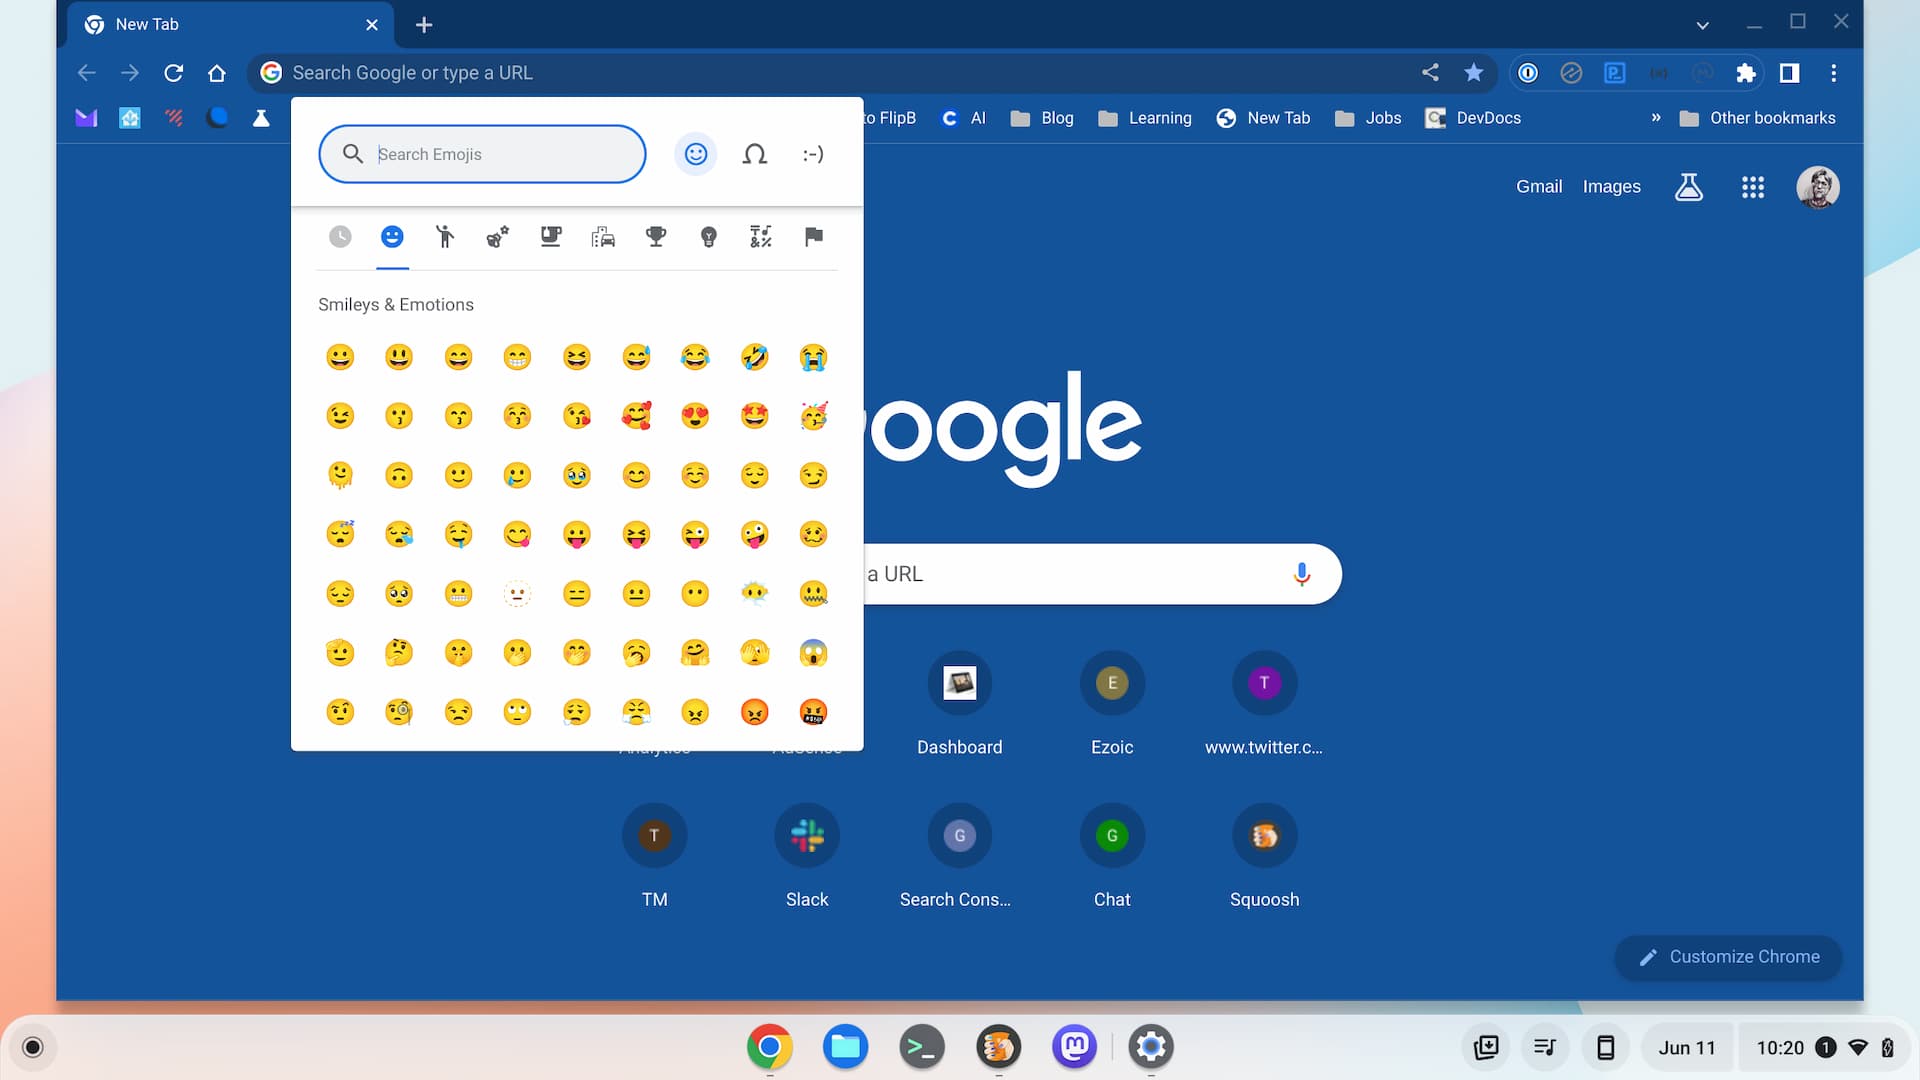 ChromeOS 114 release adds several new Chromebook features